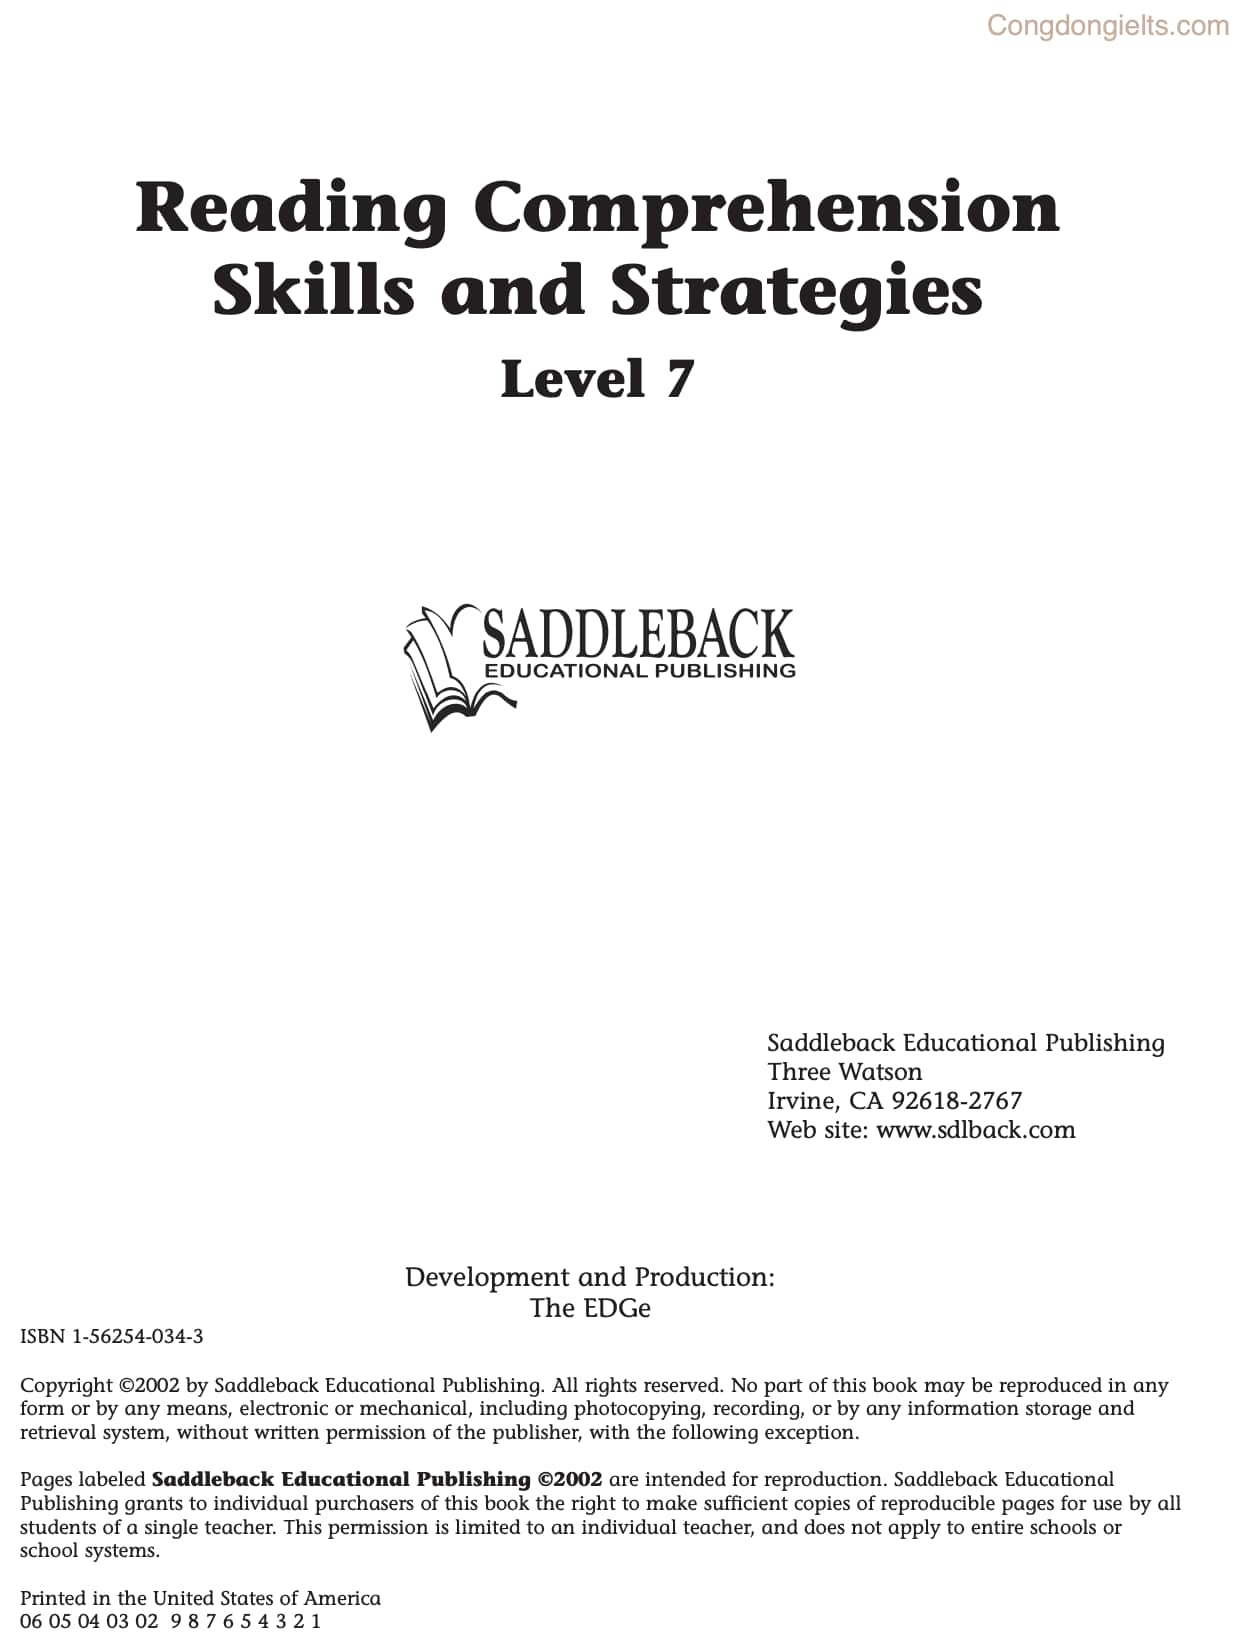 Download Reading Comprehension Skills and strategies level 7 PDF Full